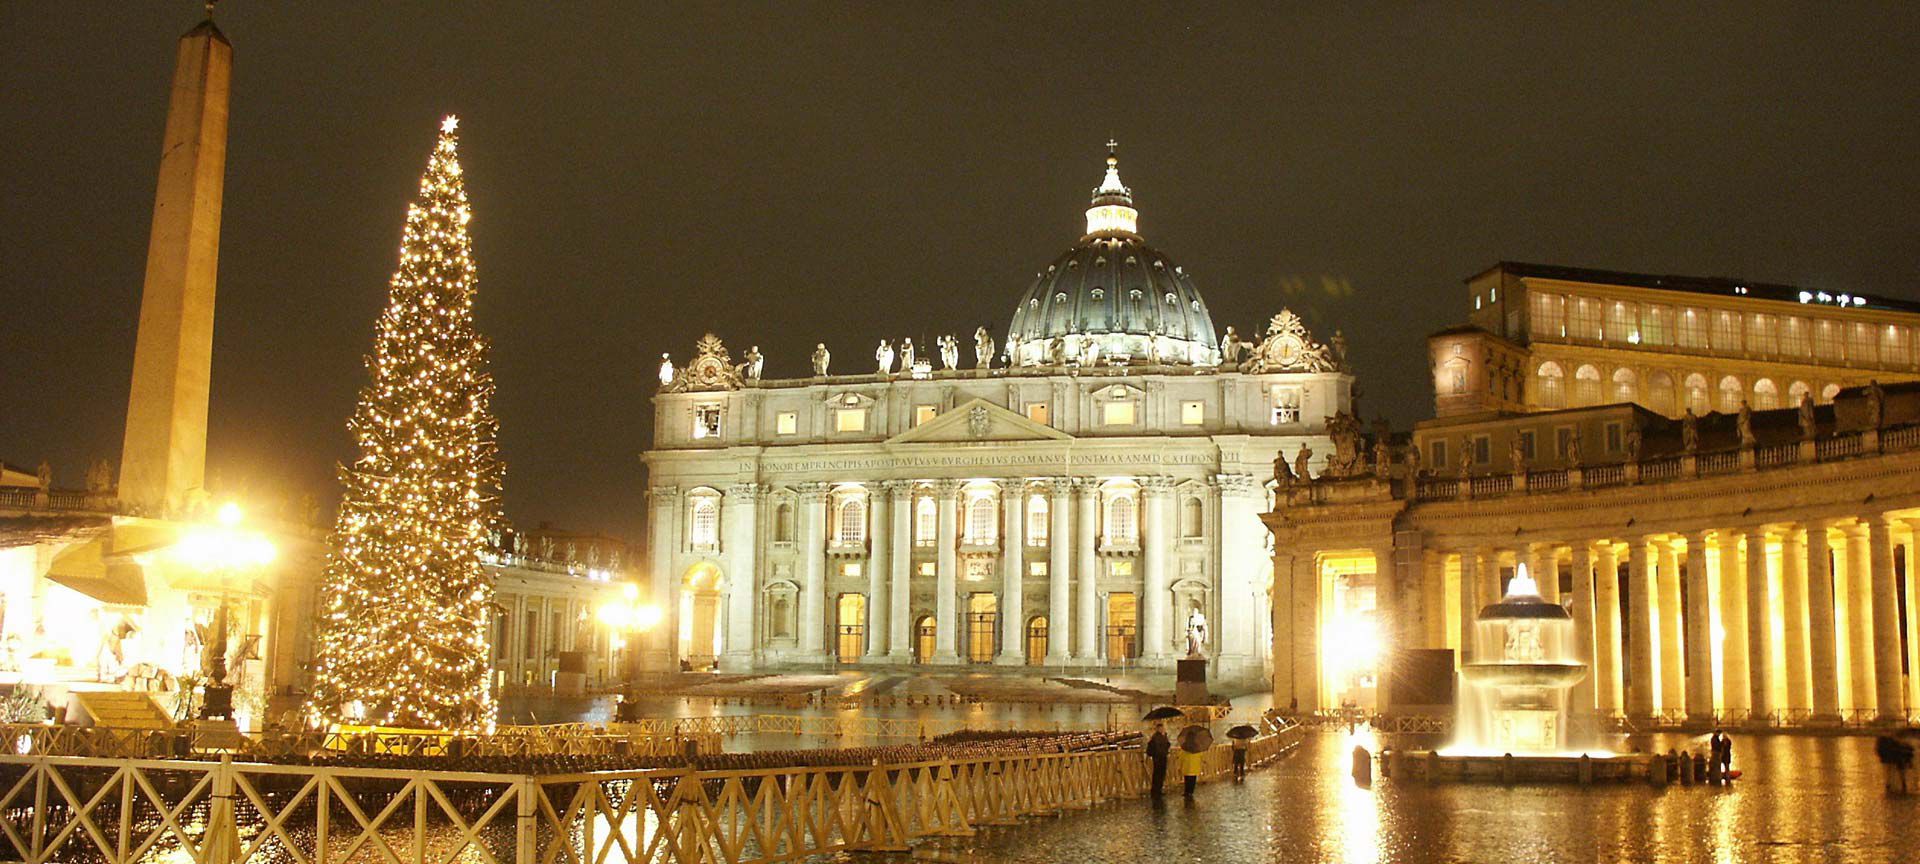 St Peters Basilica Rome Italy